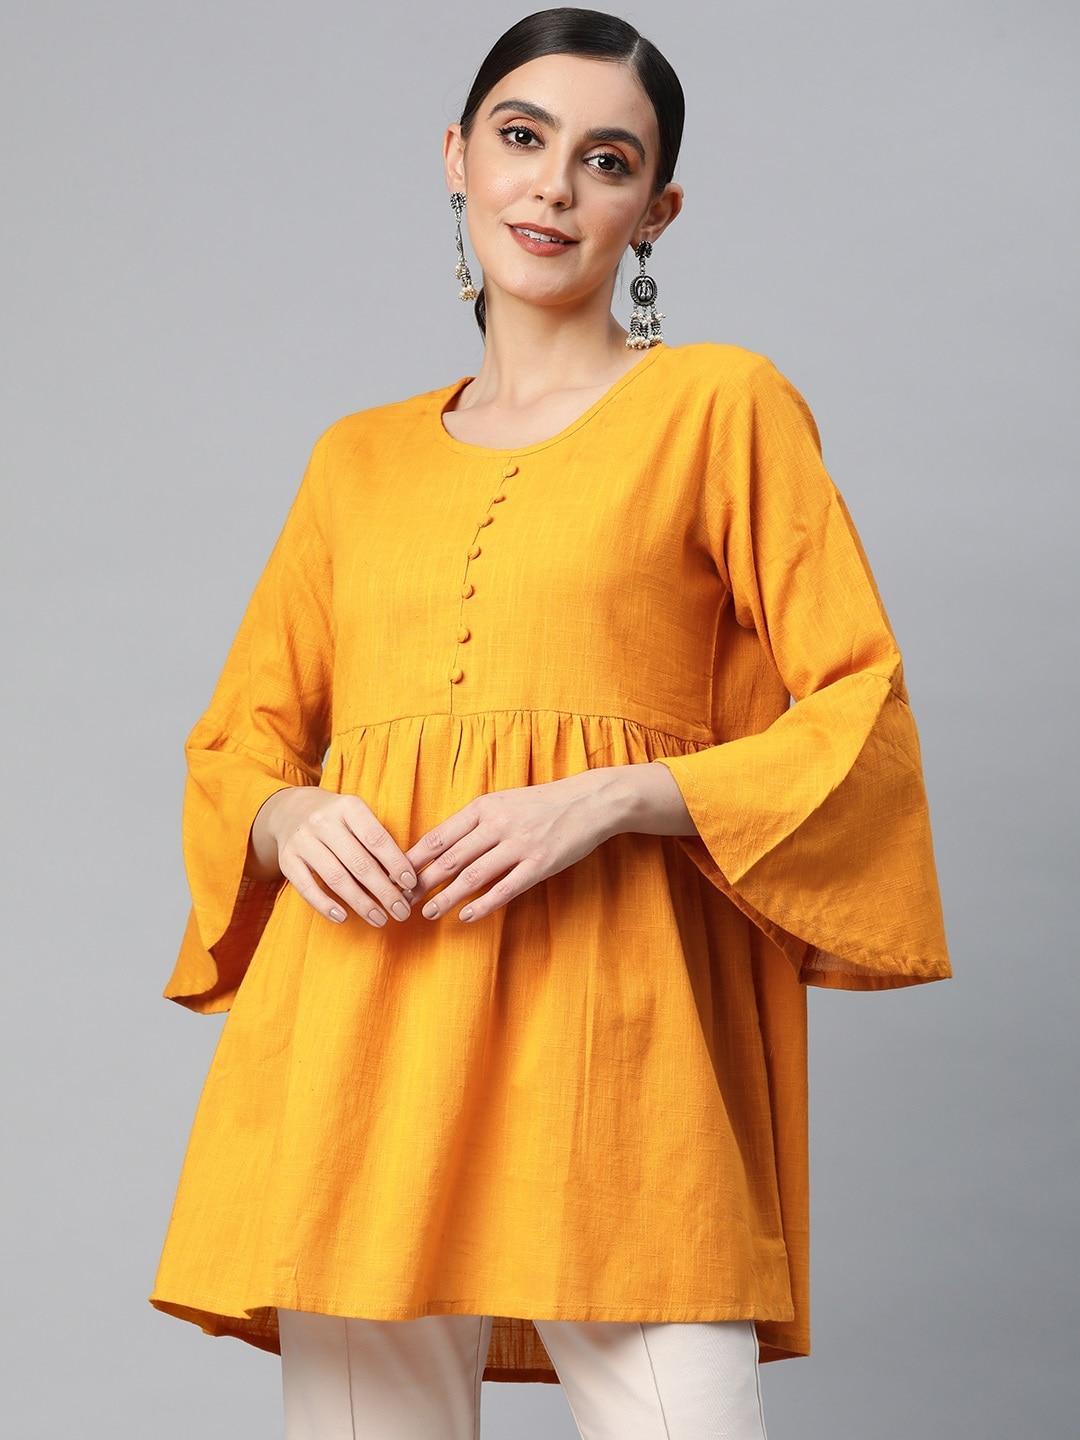 SVARCHI Mustard Yellow Pure Cotton Solid A-Line Top